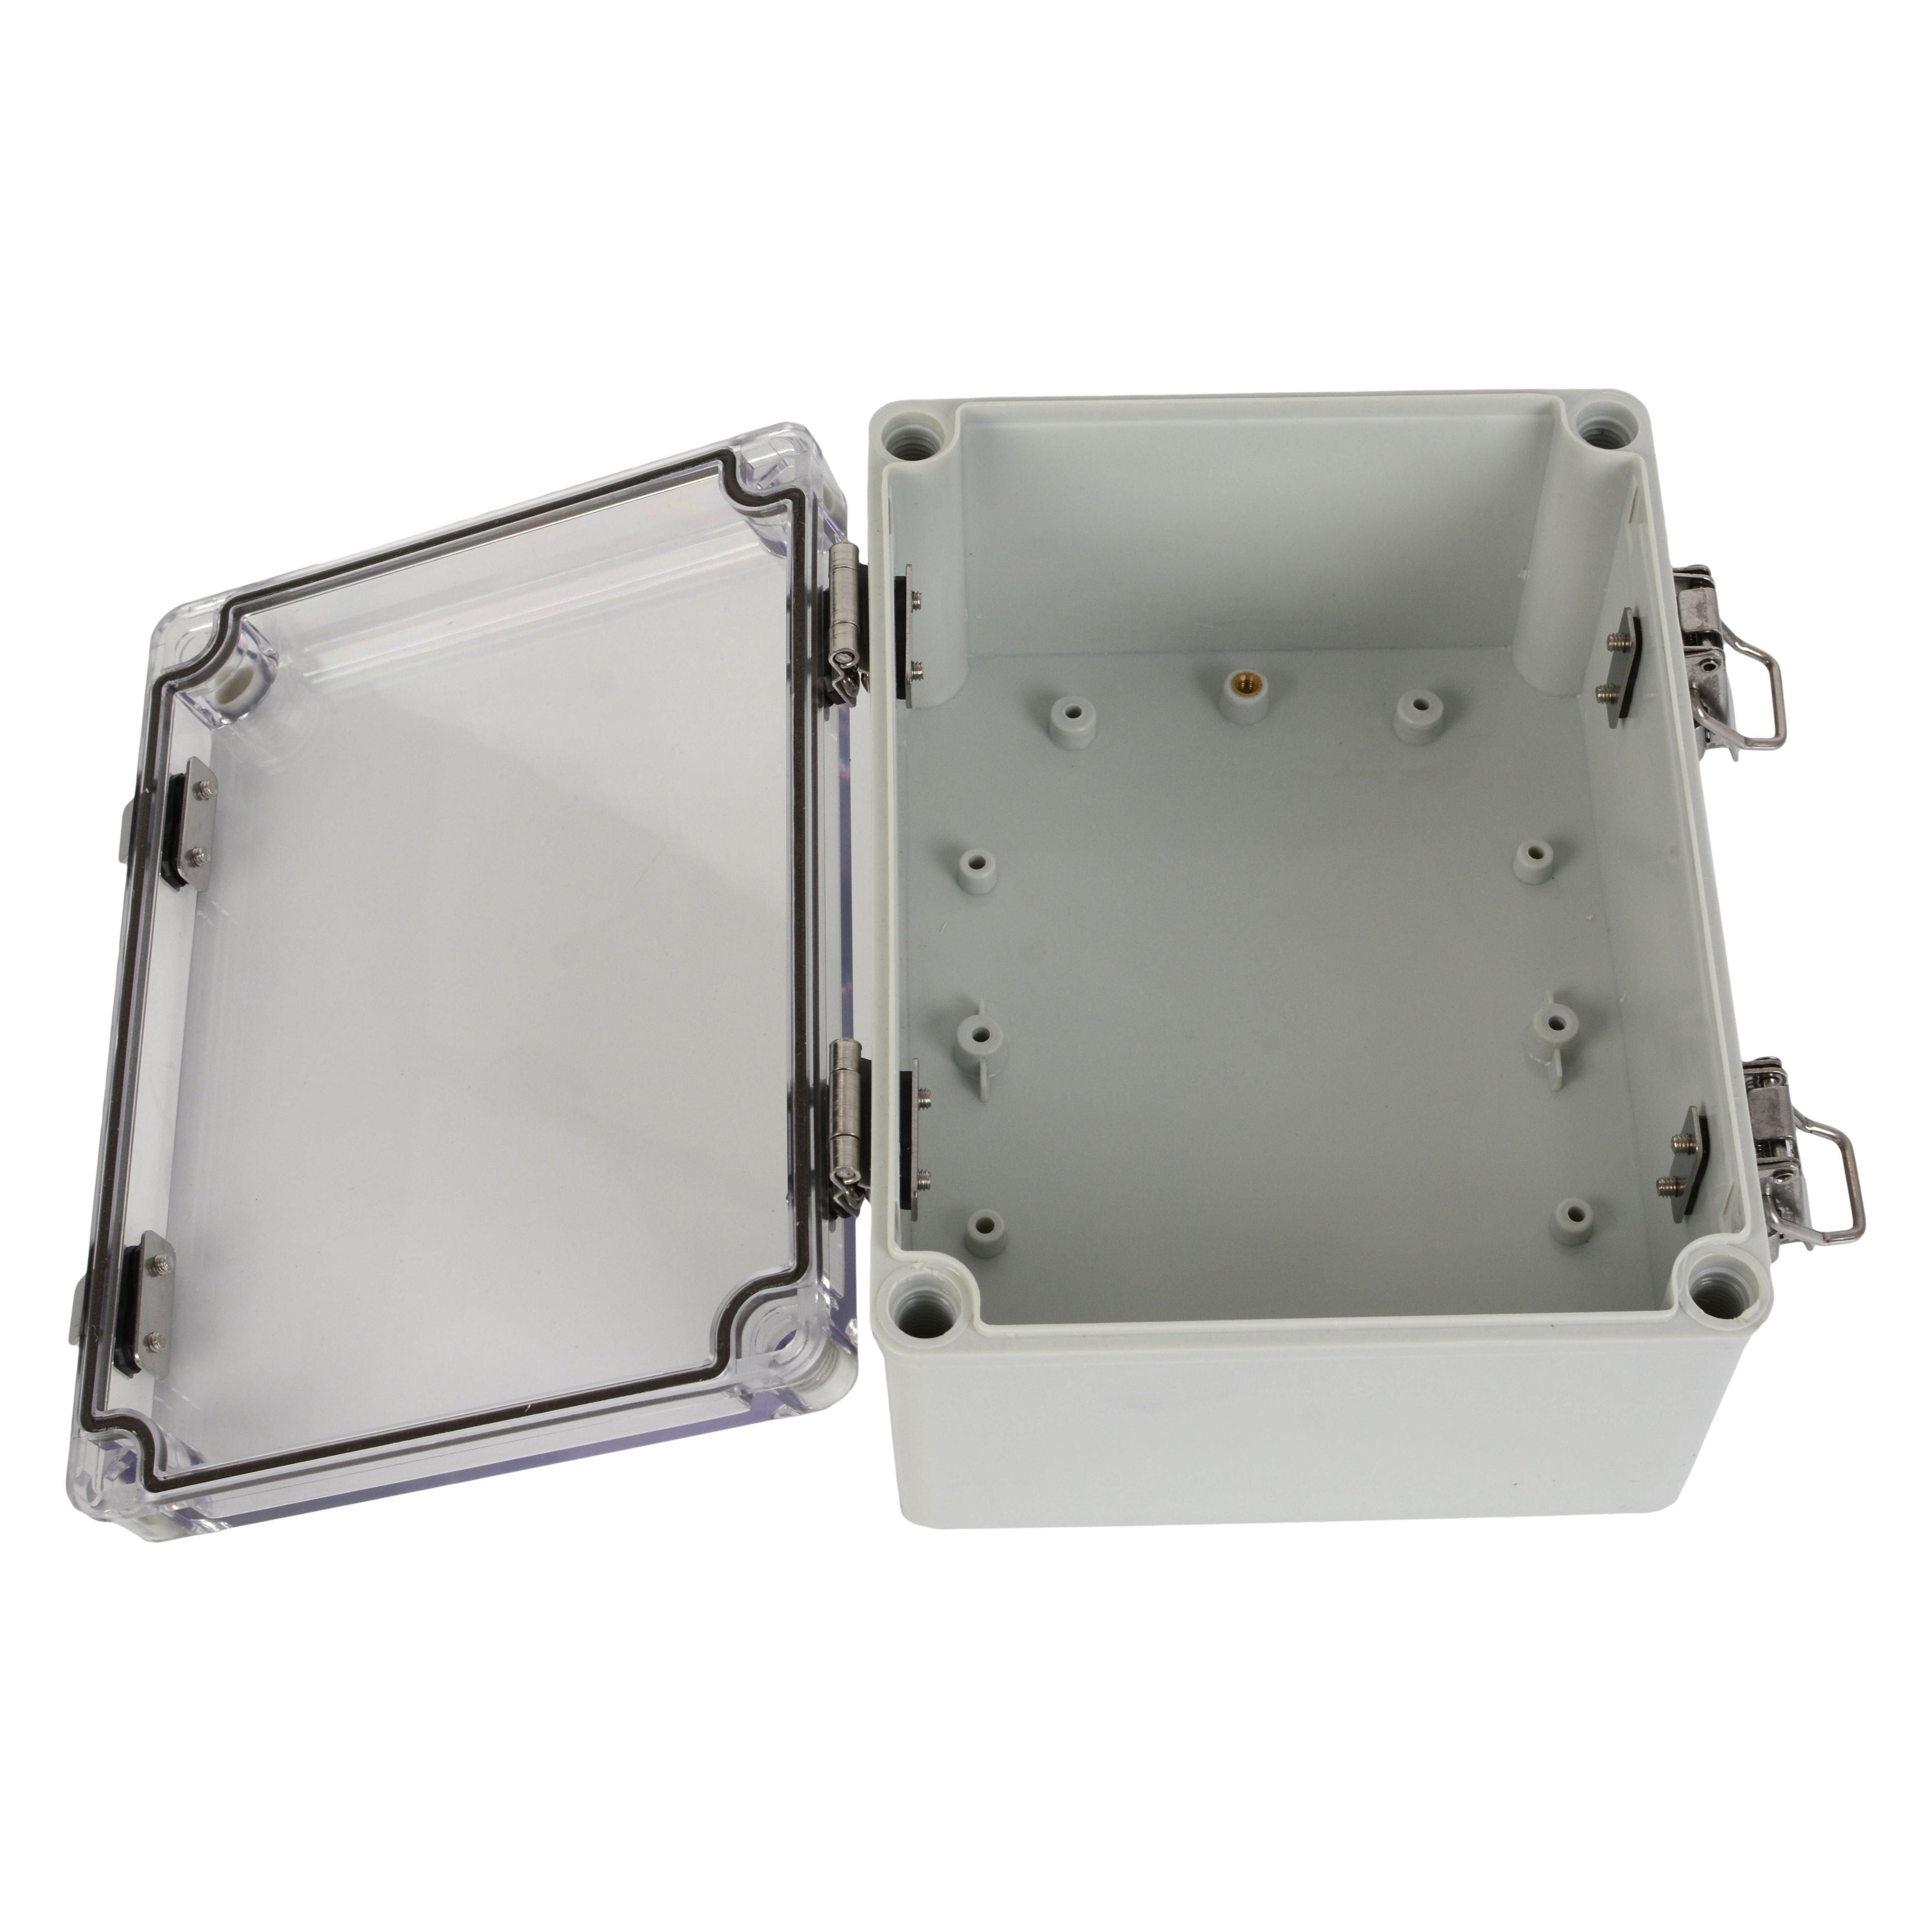 ABS IP66 Clear Lid Junction Box 150 x 200 x 100mm